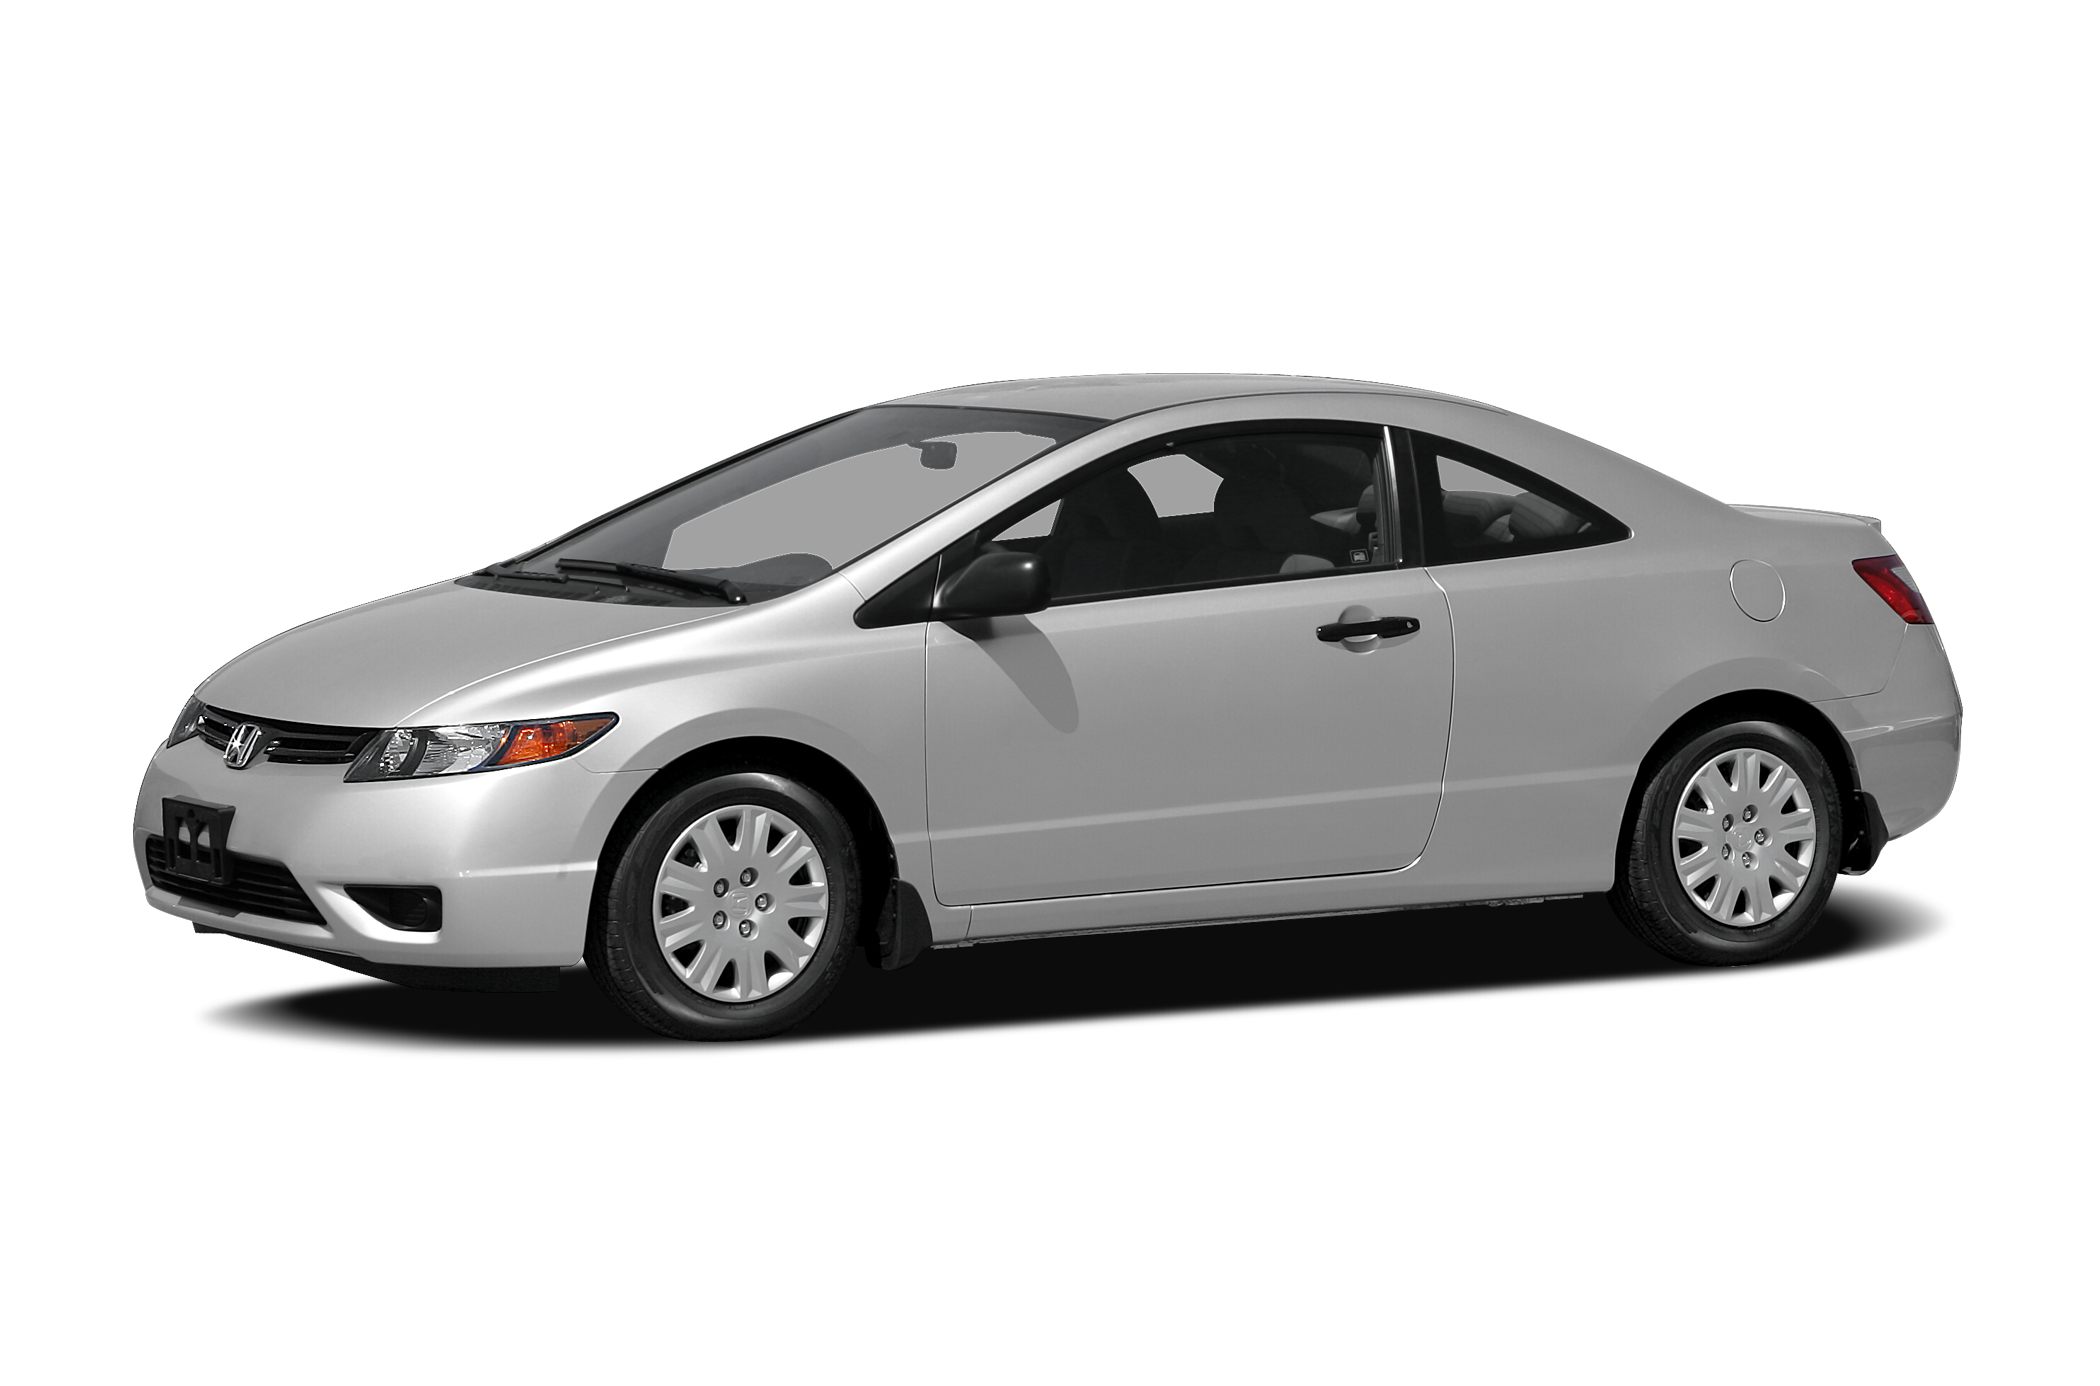 2008 Honda Civic Lx 2dr Coupe Specs And Prices